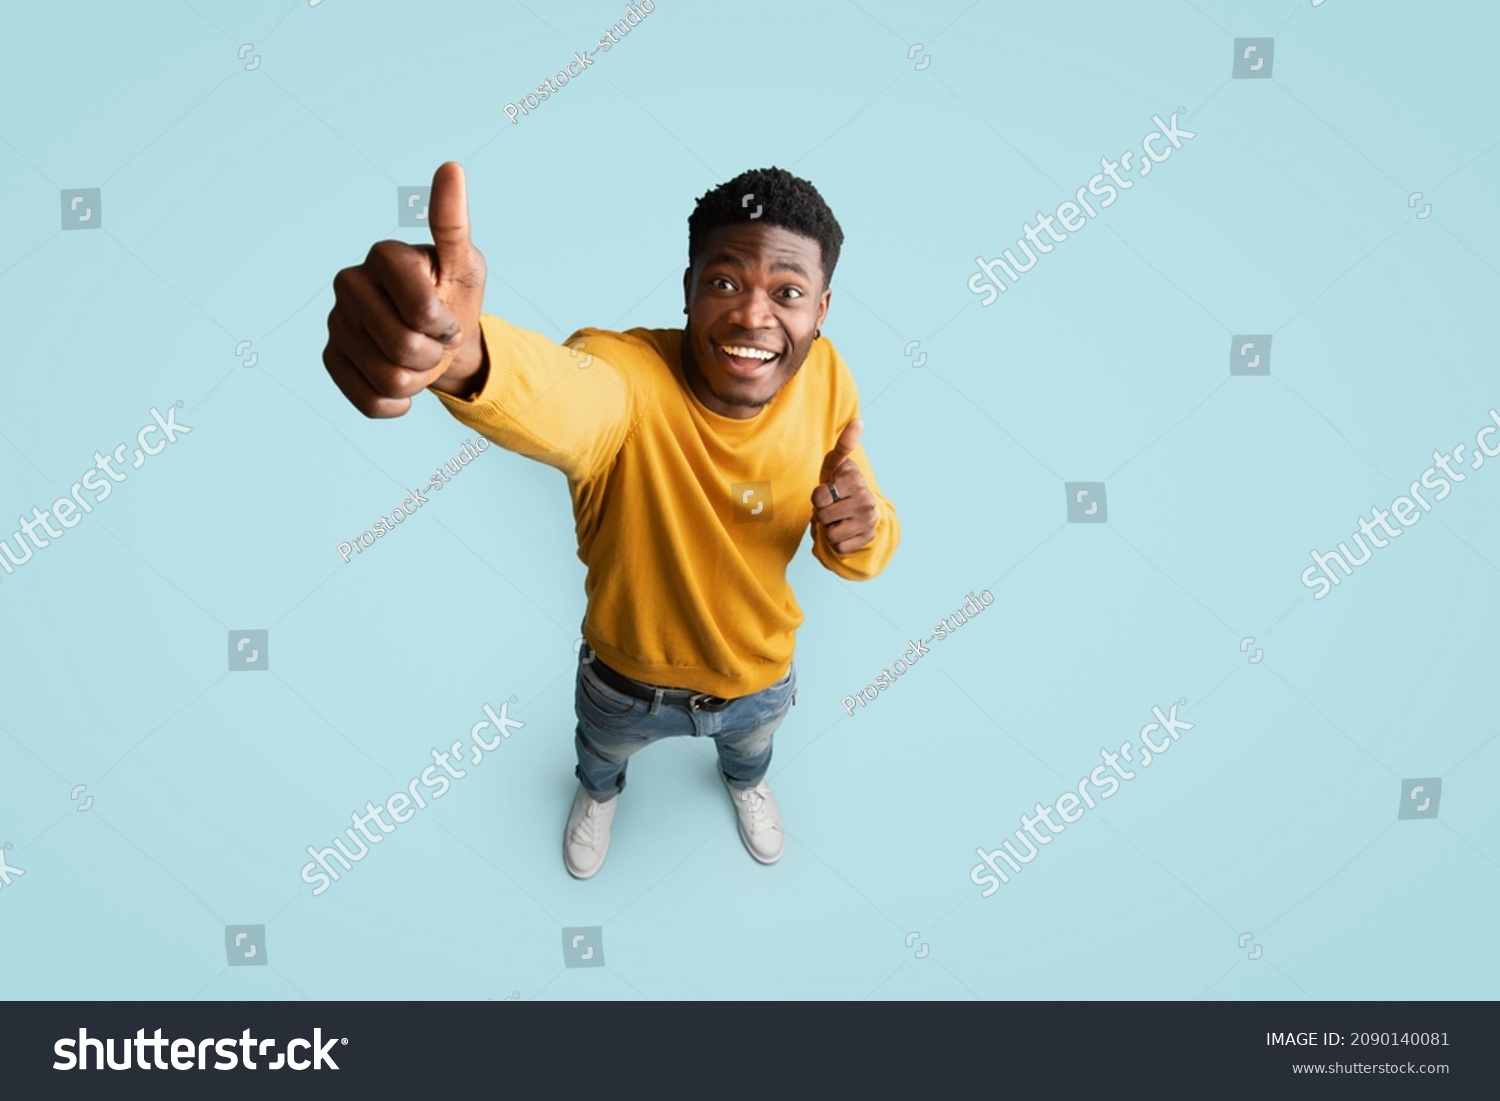 Top view of joyful handsome african american millennial guy in nice outfit showing thumb up and smiling at camera on blue studio background, recommending something exciting, copy space, full length #2090140081